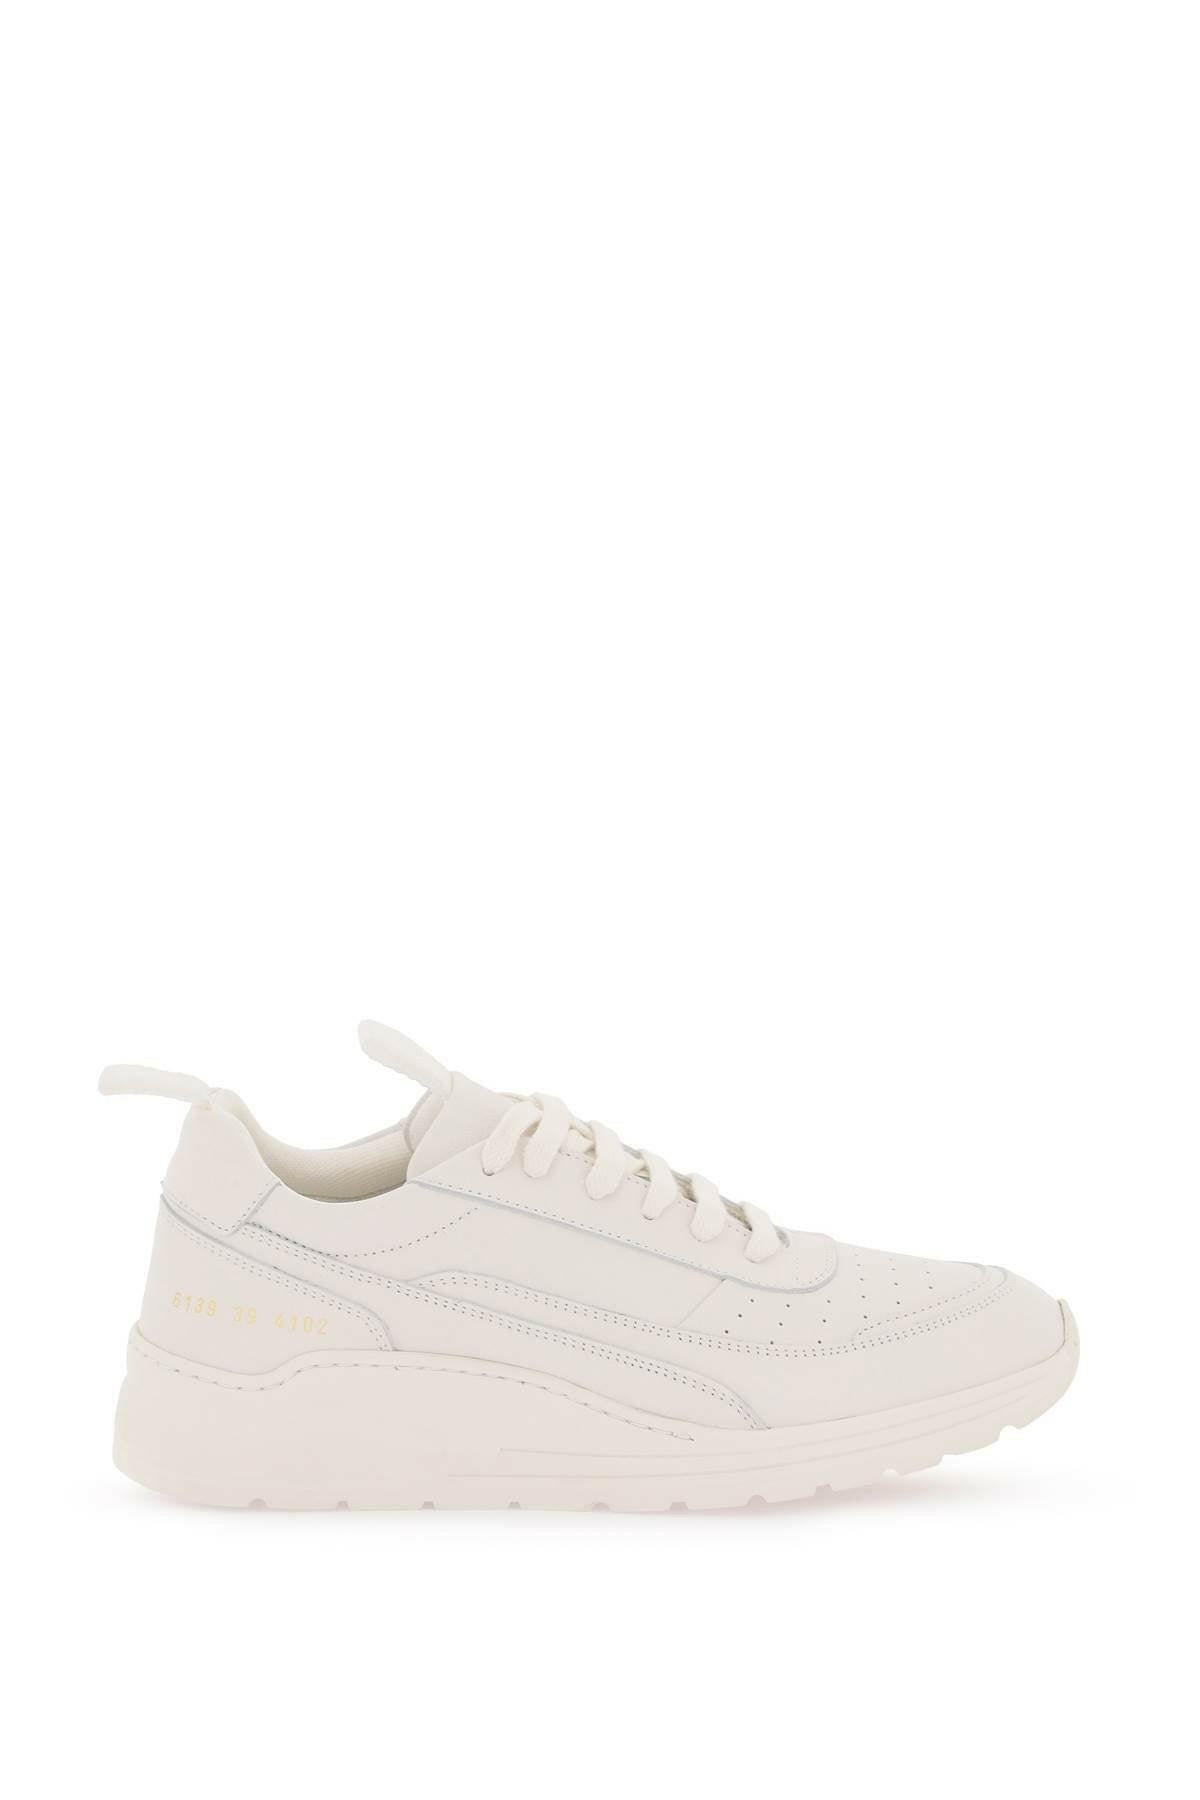 Track 90 Leather Low-Top Sneakers COMMON PROJECTS JOHN JULIA.